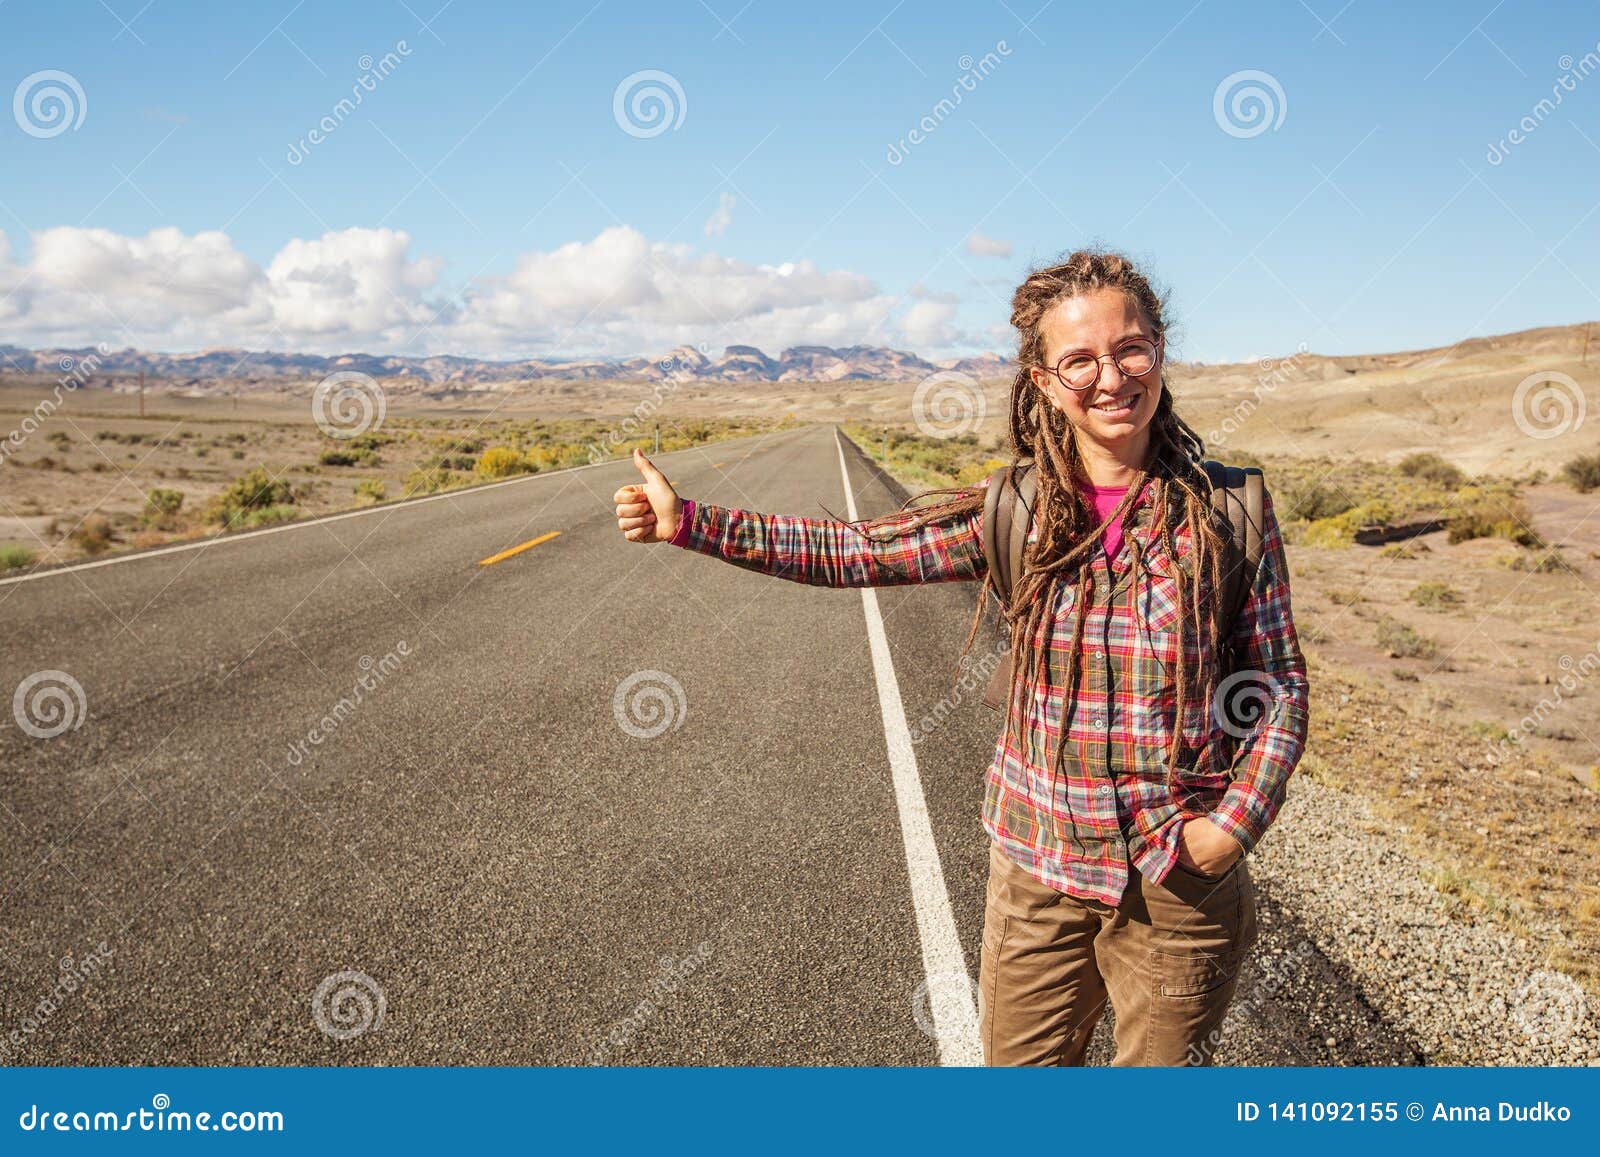 Hitchhiker Woman Walking on a Road in USA Stock Image - Image of ...